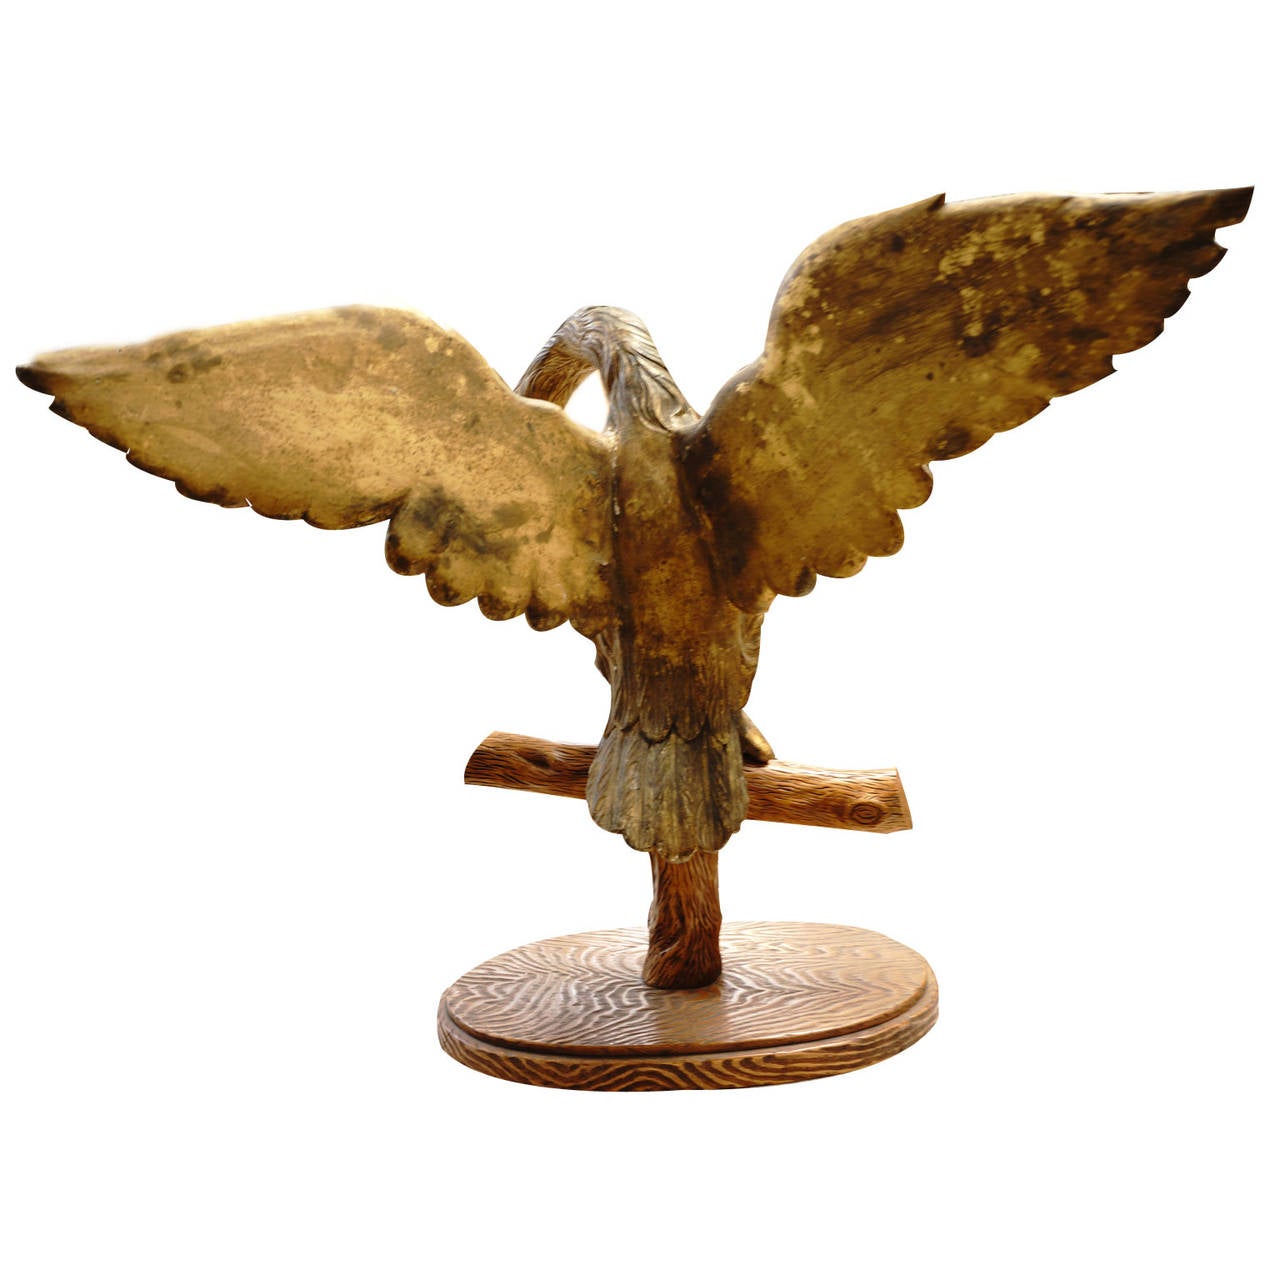 This decorative, hand-carved, wood and gold gilt figure of a swan is from the French Empire period and is in excellent condition. The stand was custom made for the figure at a later date. The height of the stand is 8 inches.